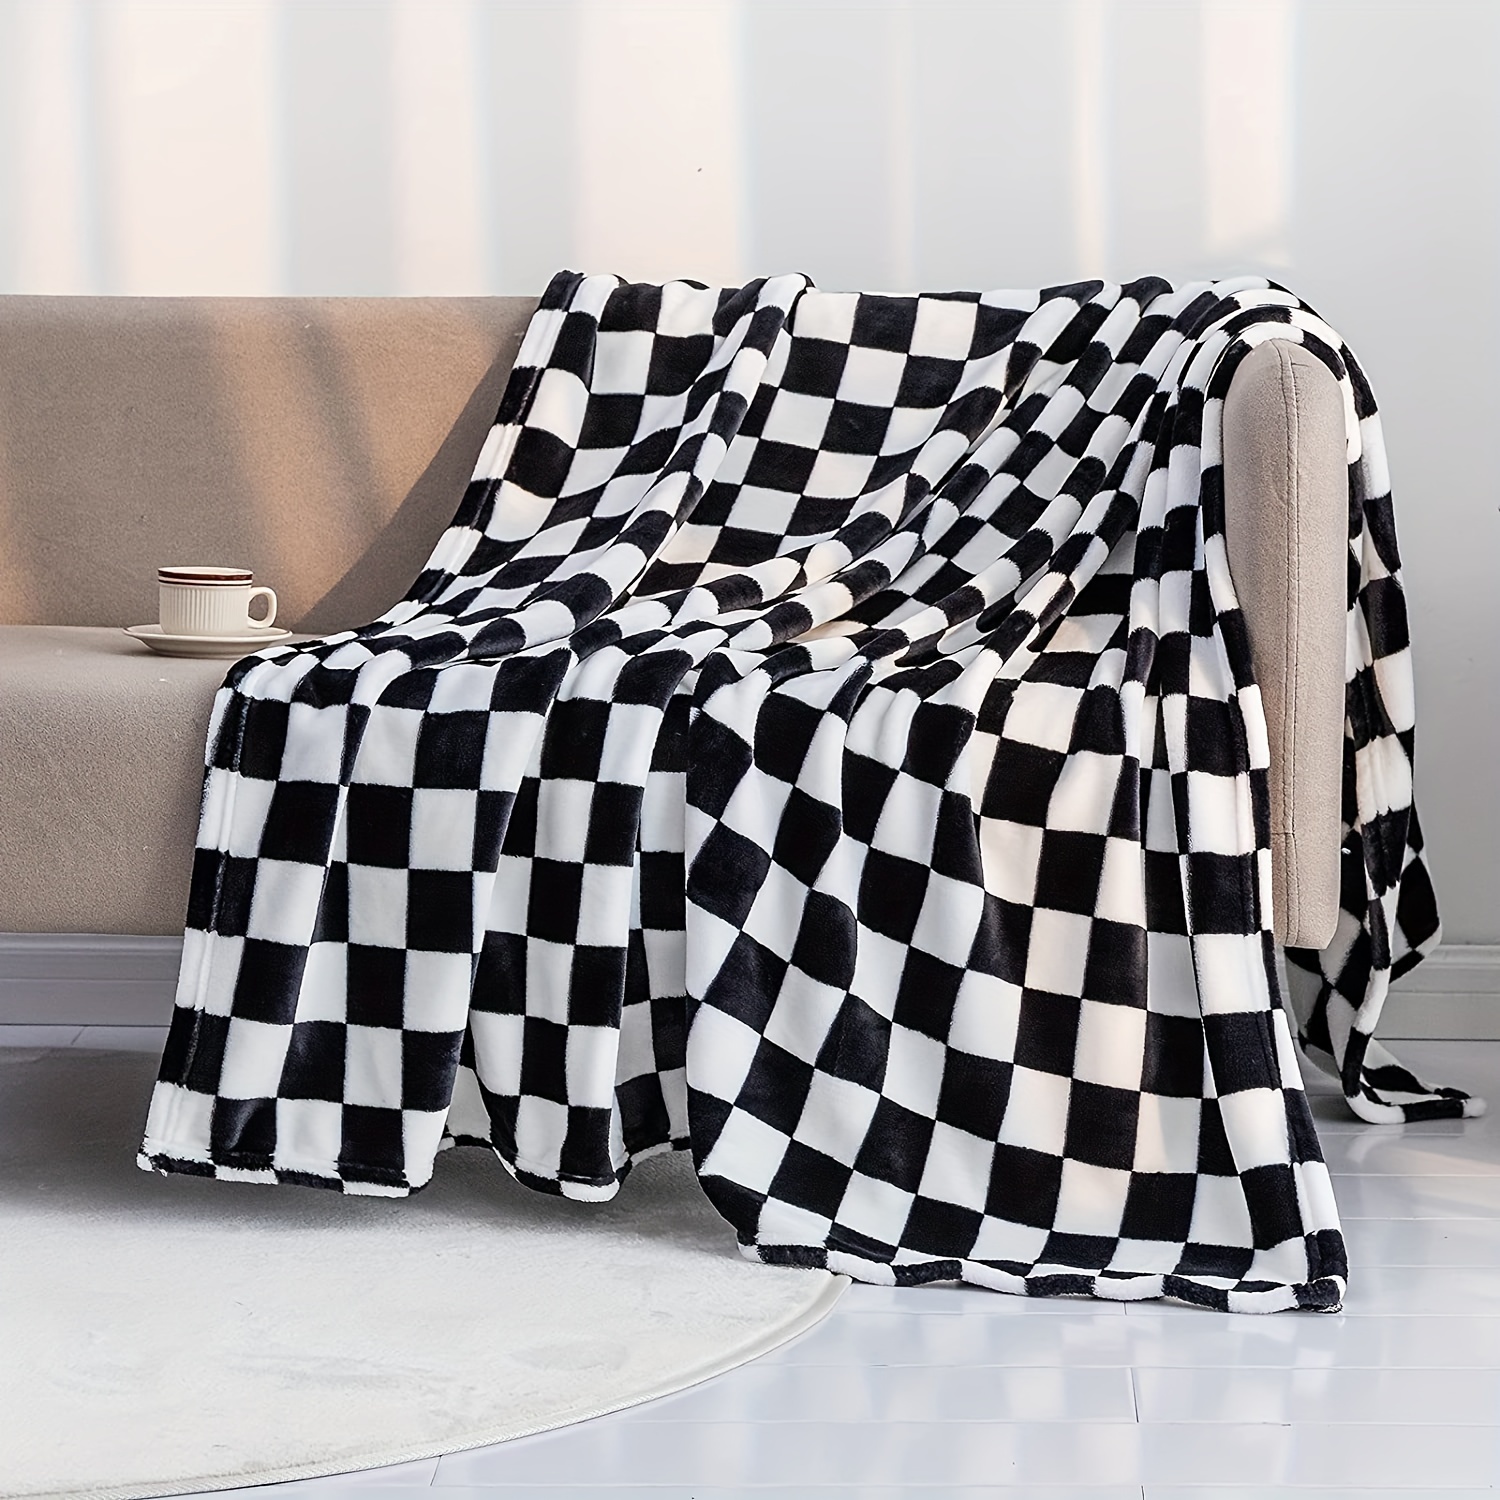 Warm And Cozy Checkerboard Flannel Blanket For Office, Sofa, Couch